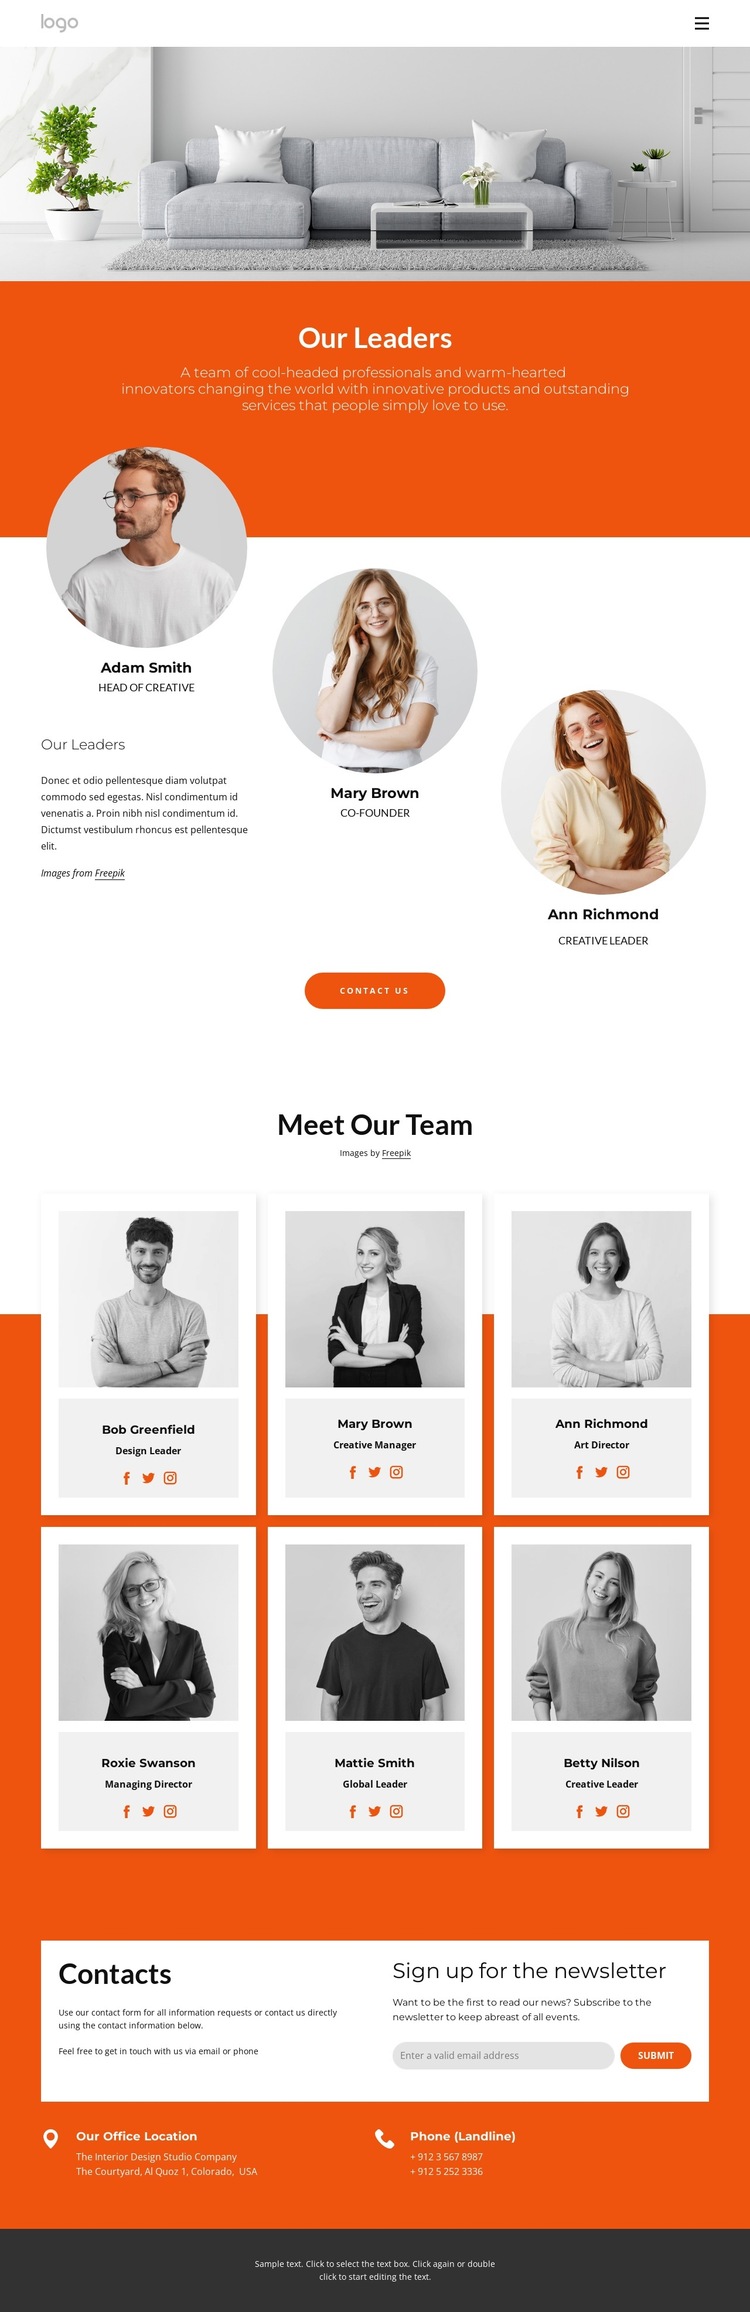 Our great team HTML5 Template